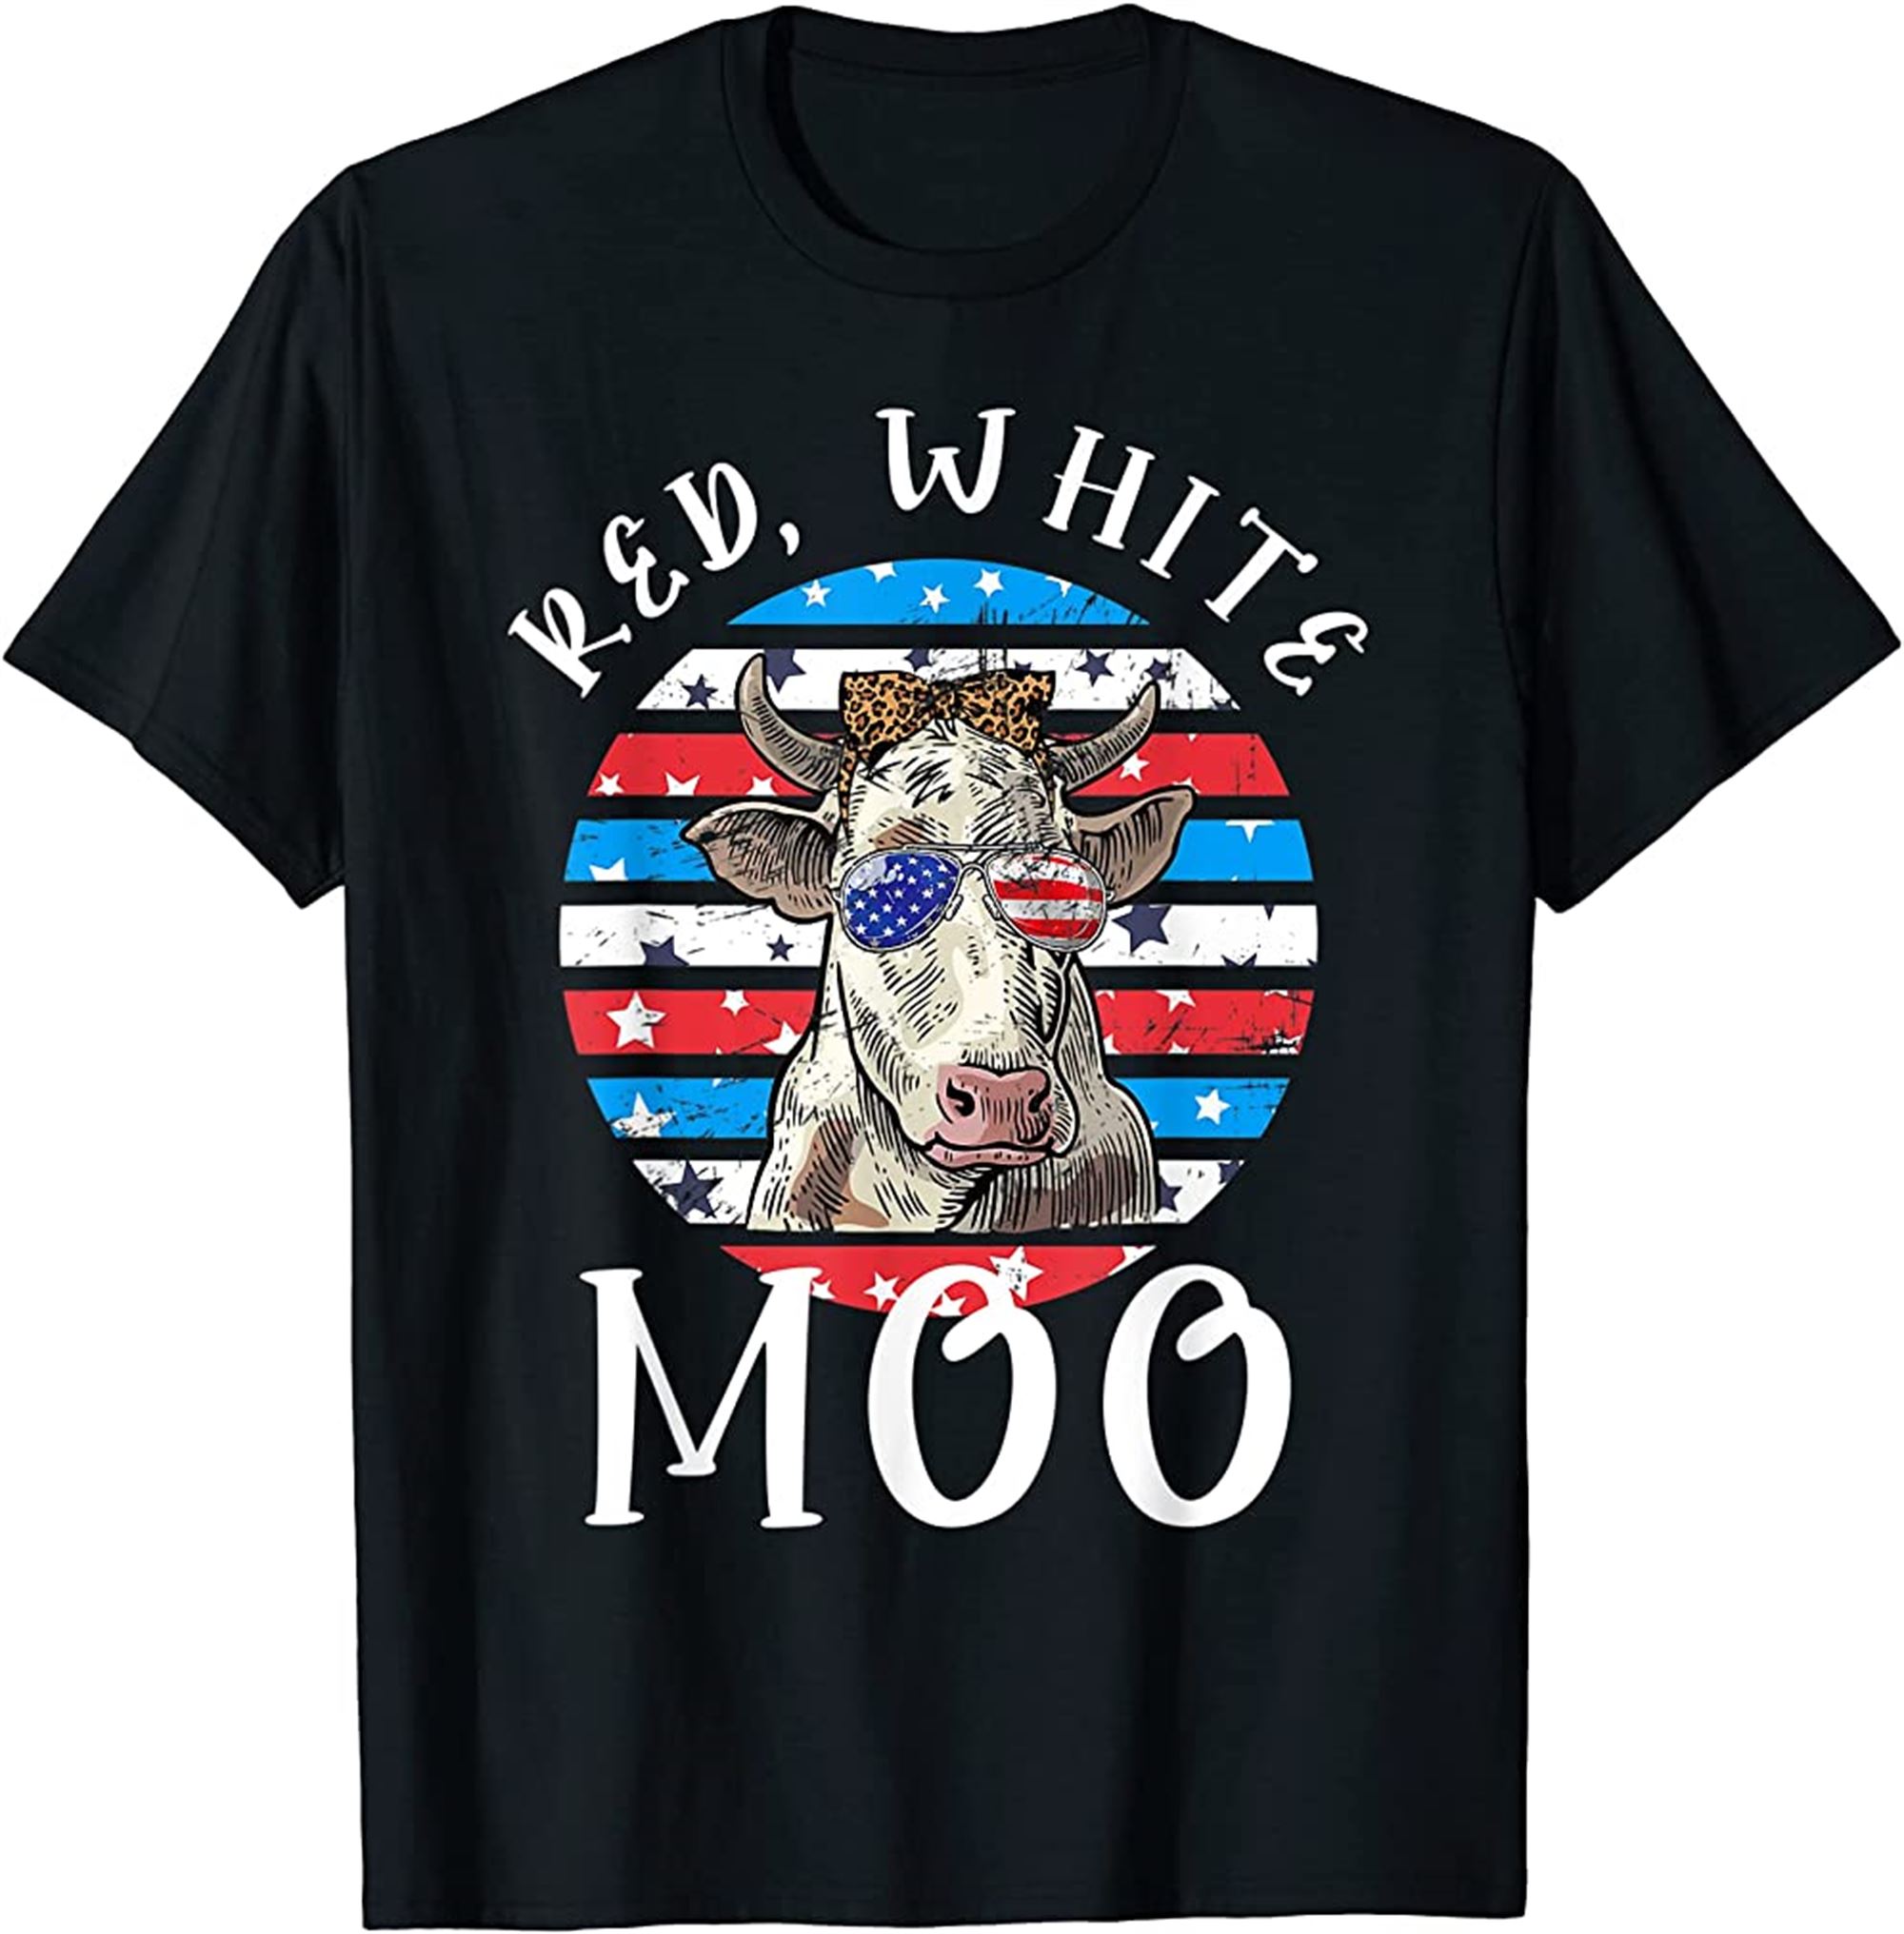 Red White Moo Cute American Cow Farmer 4th Of July Leopard T-shirt Full Size Up To 5xl